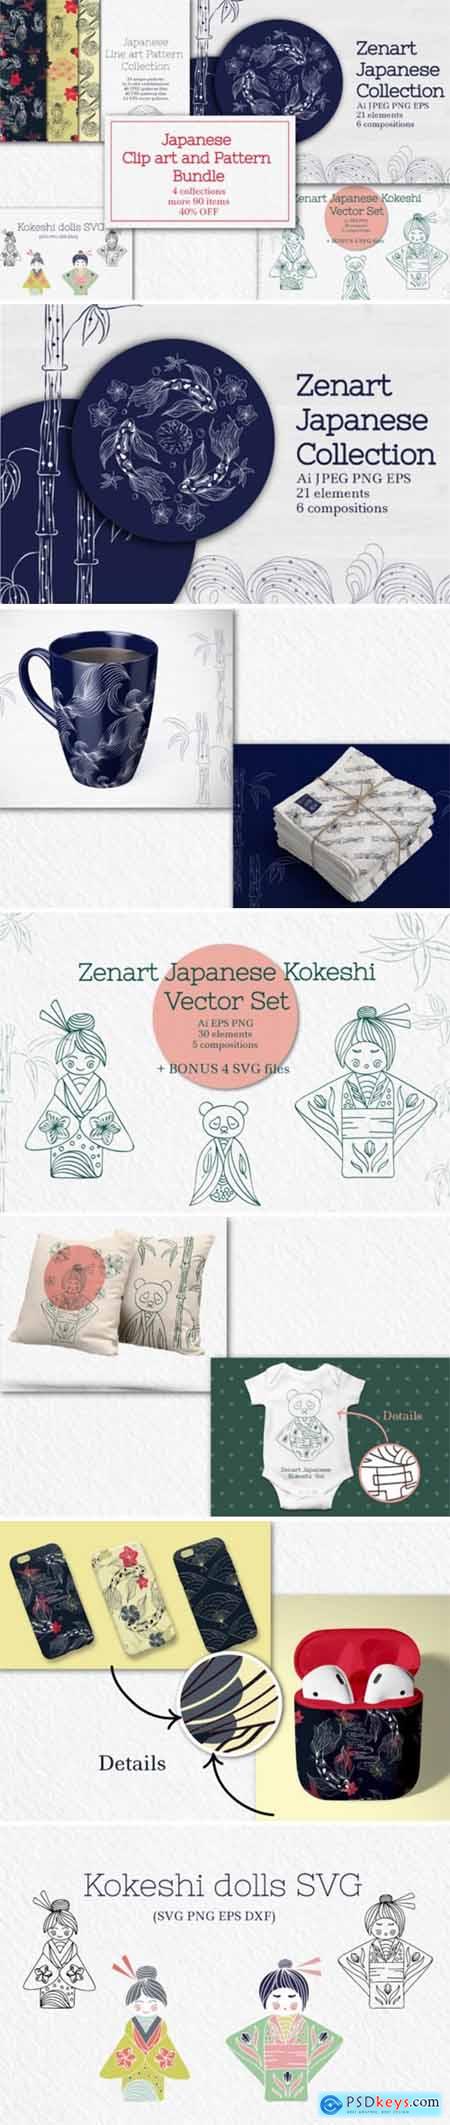 Japanese Clipart and Pattern Bundle 3042255